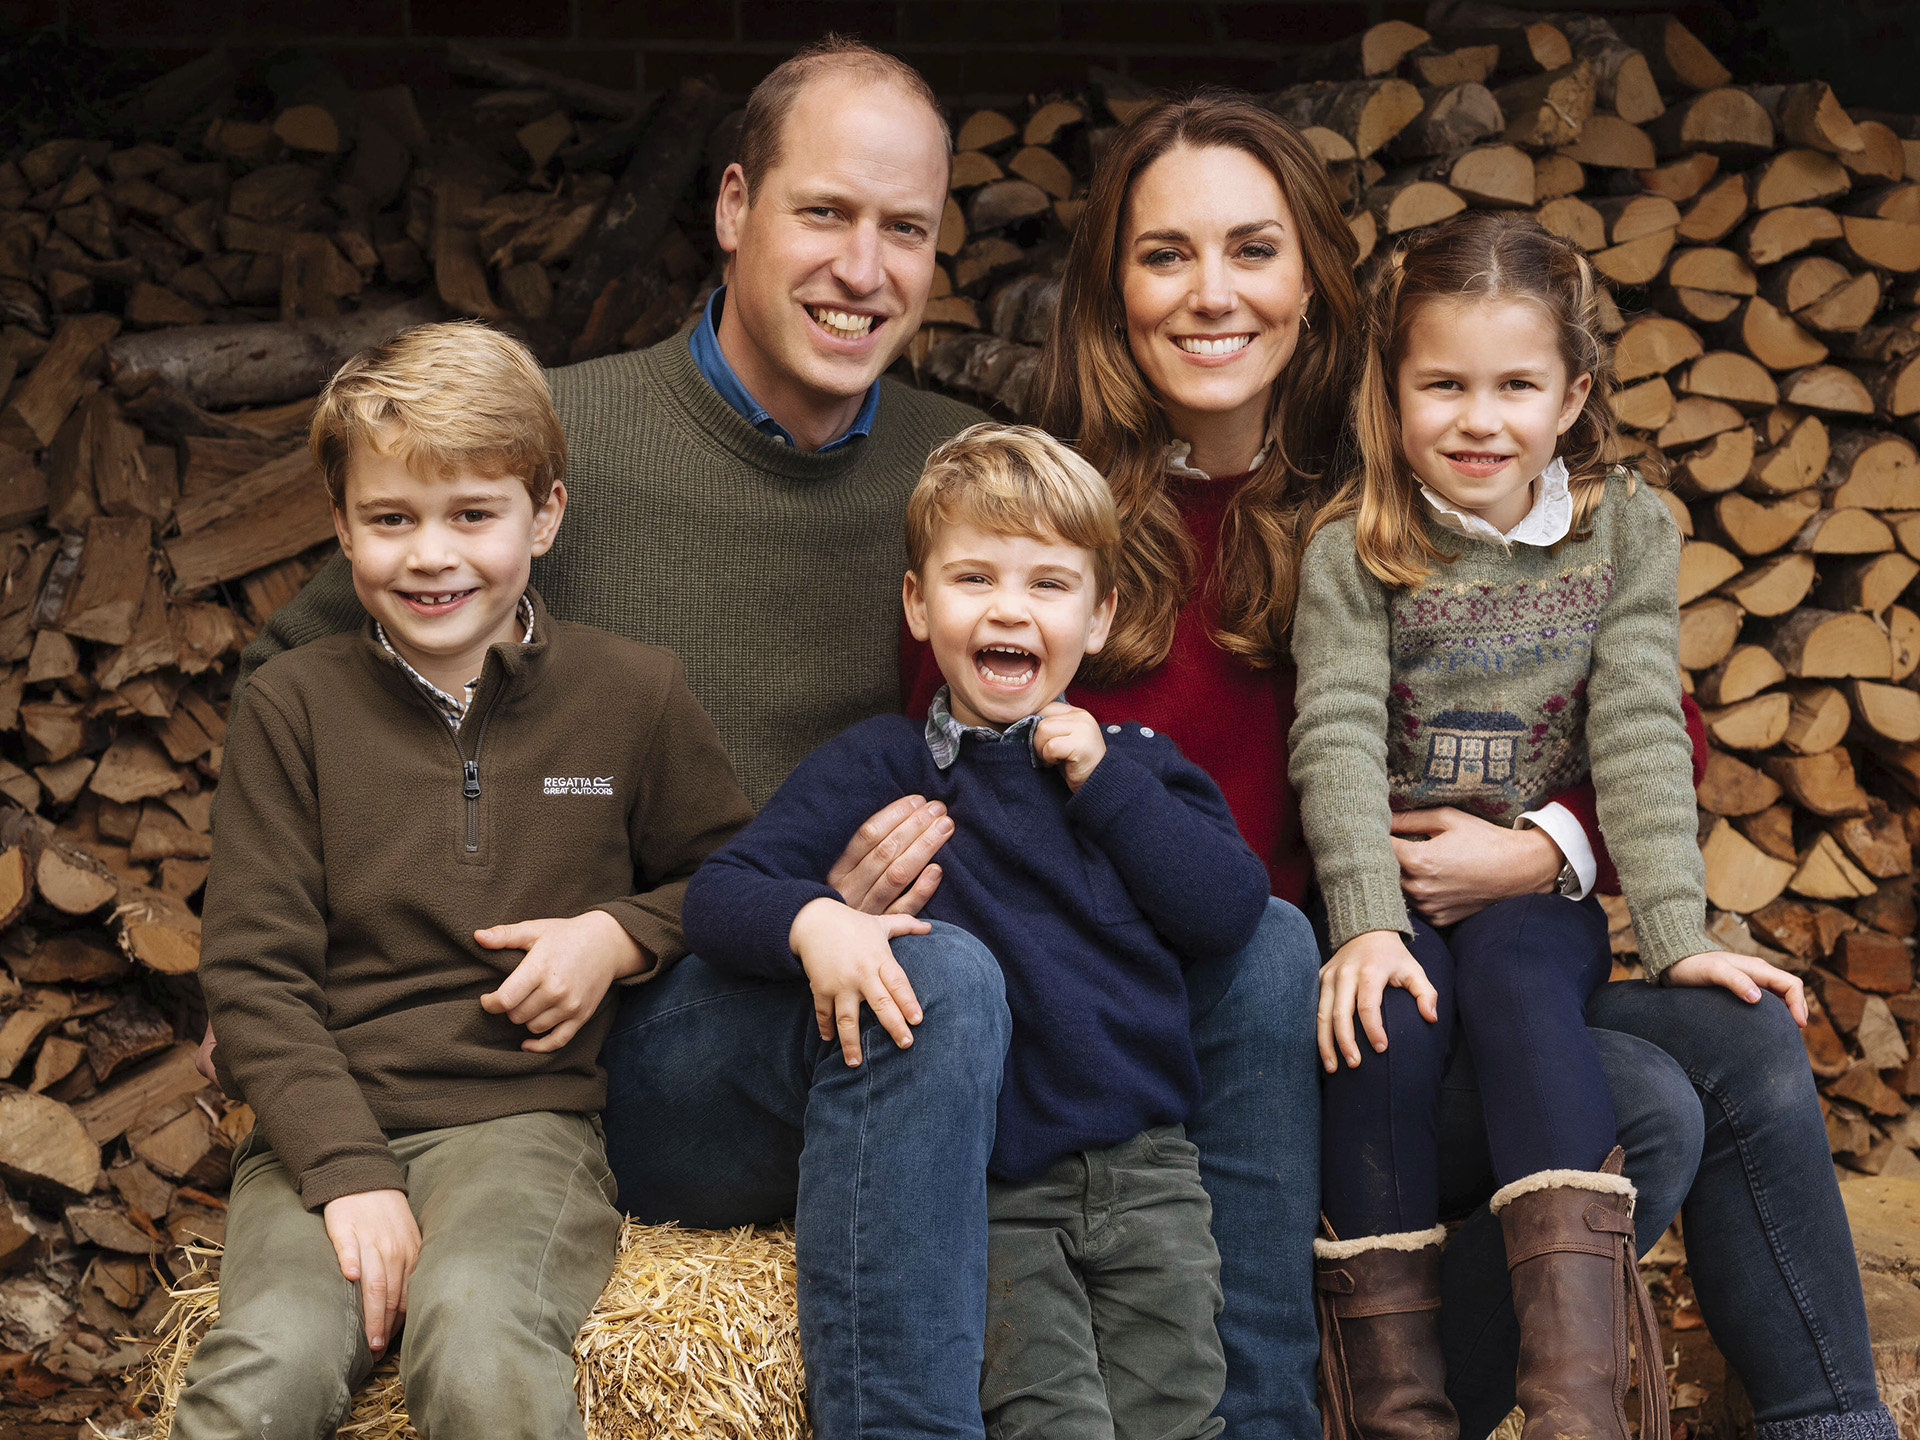 The 2020 Christmas card from Prince William, Kate and their children, Prince George, Princess Charlotte and Prince Louis, at Anmer Hall (AP)